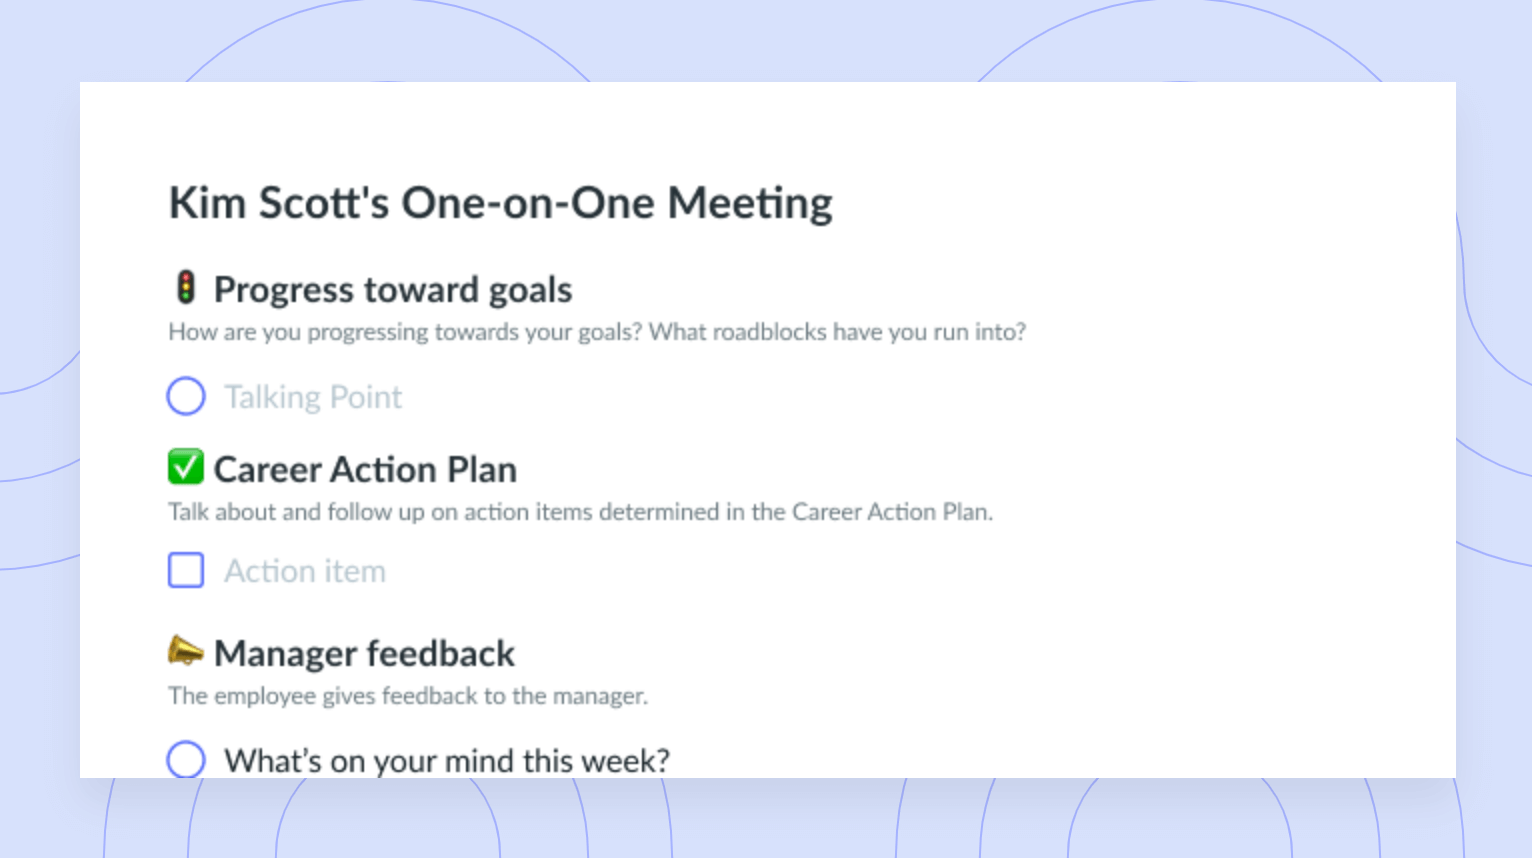 Kim Scott’s One-on-One Meeting Template